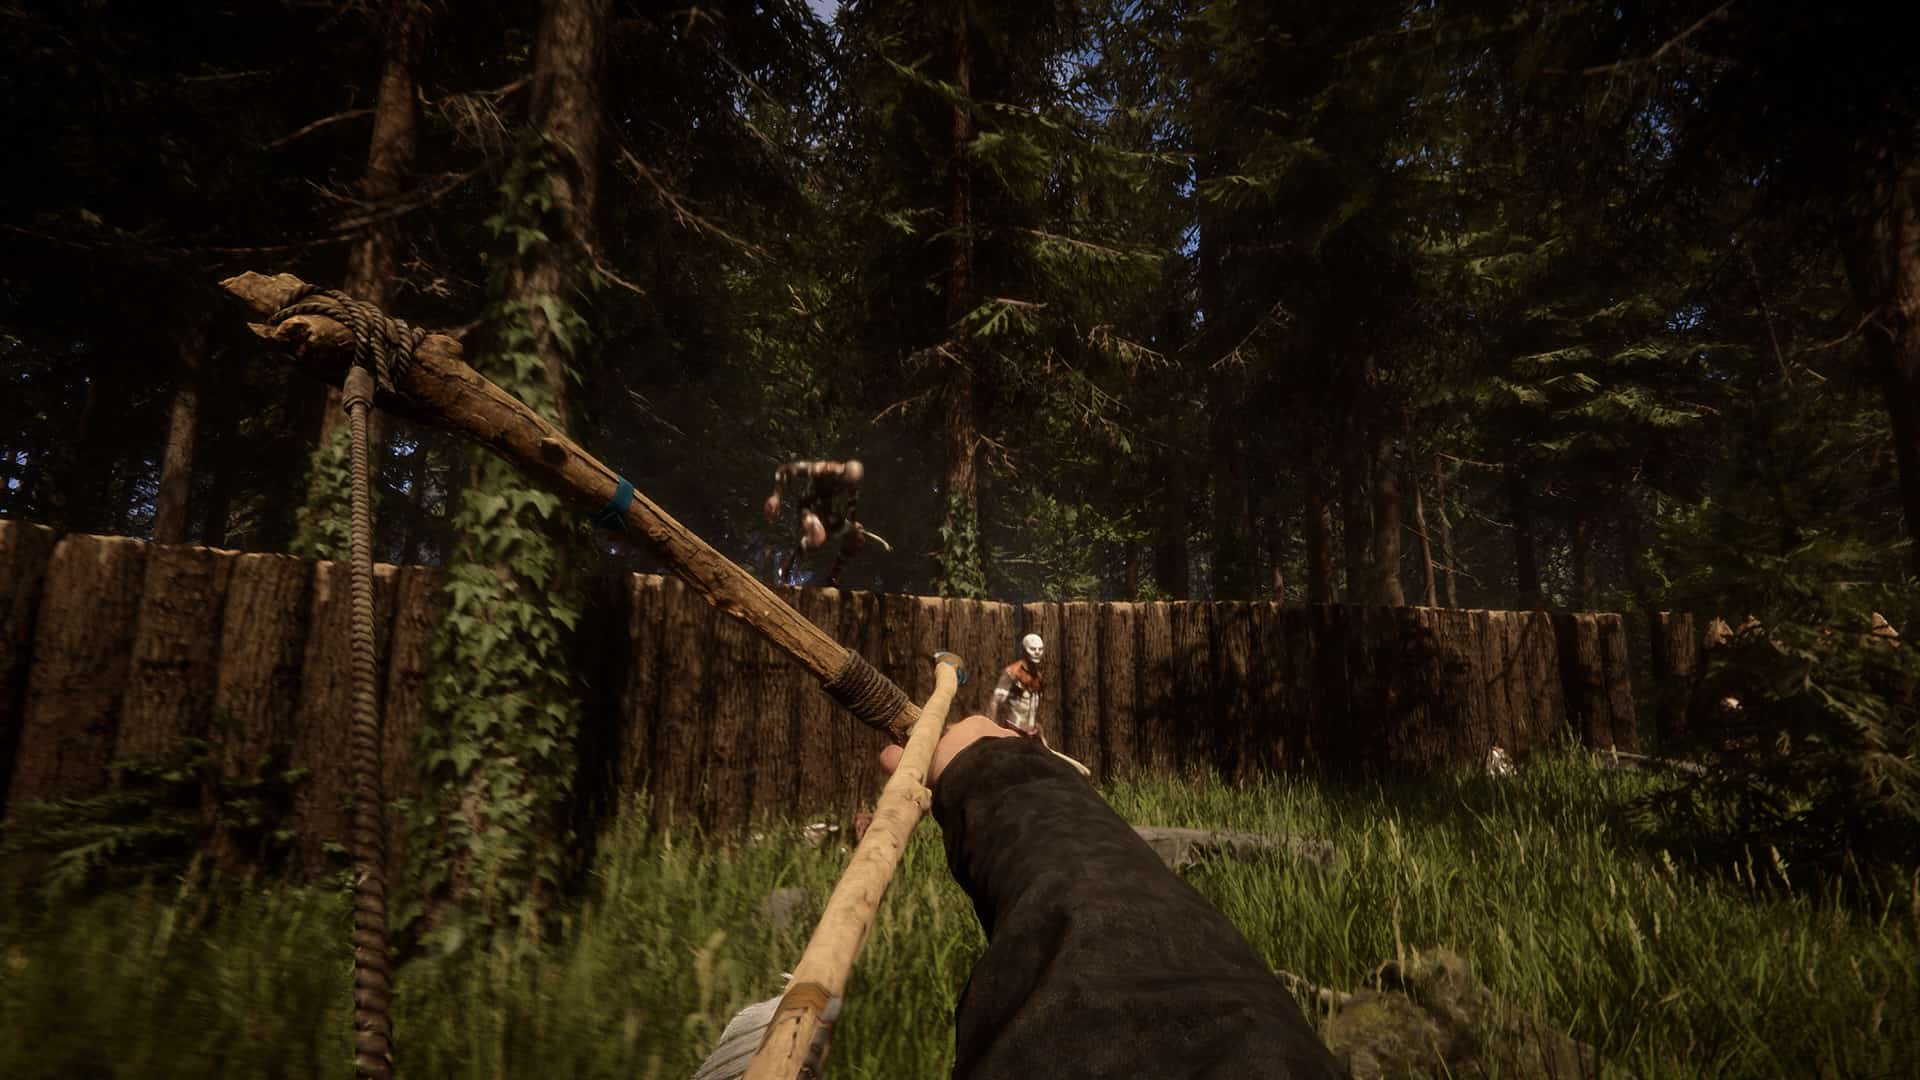 Will Sons of the Forest get Creative Mode?